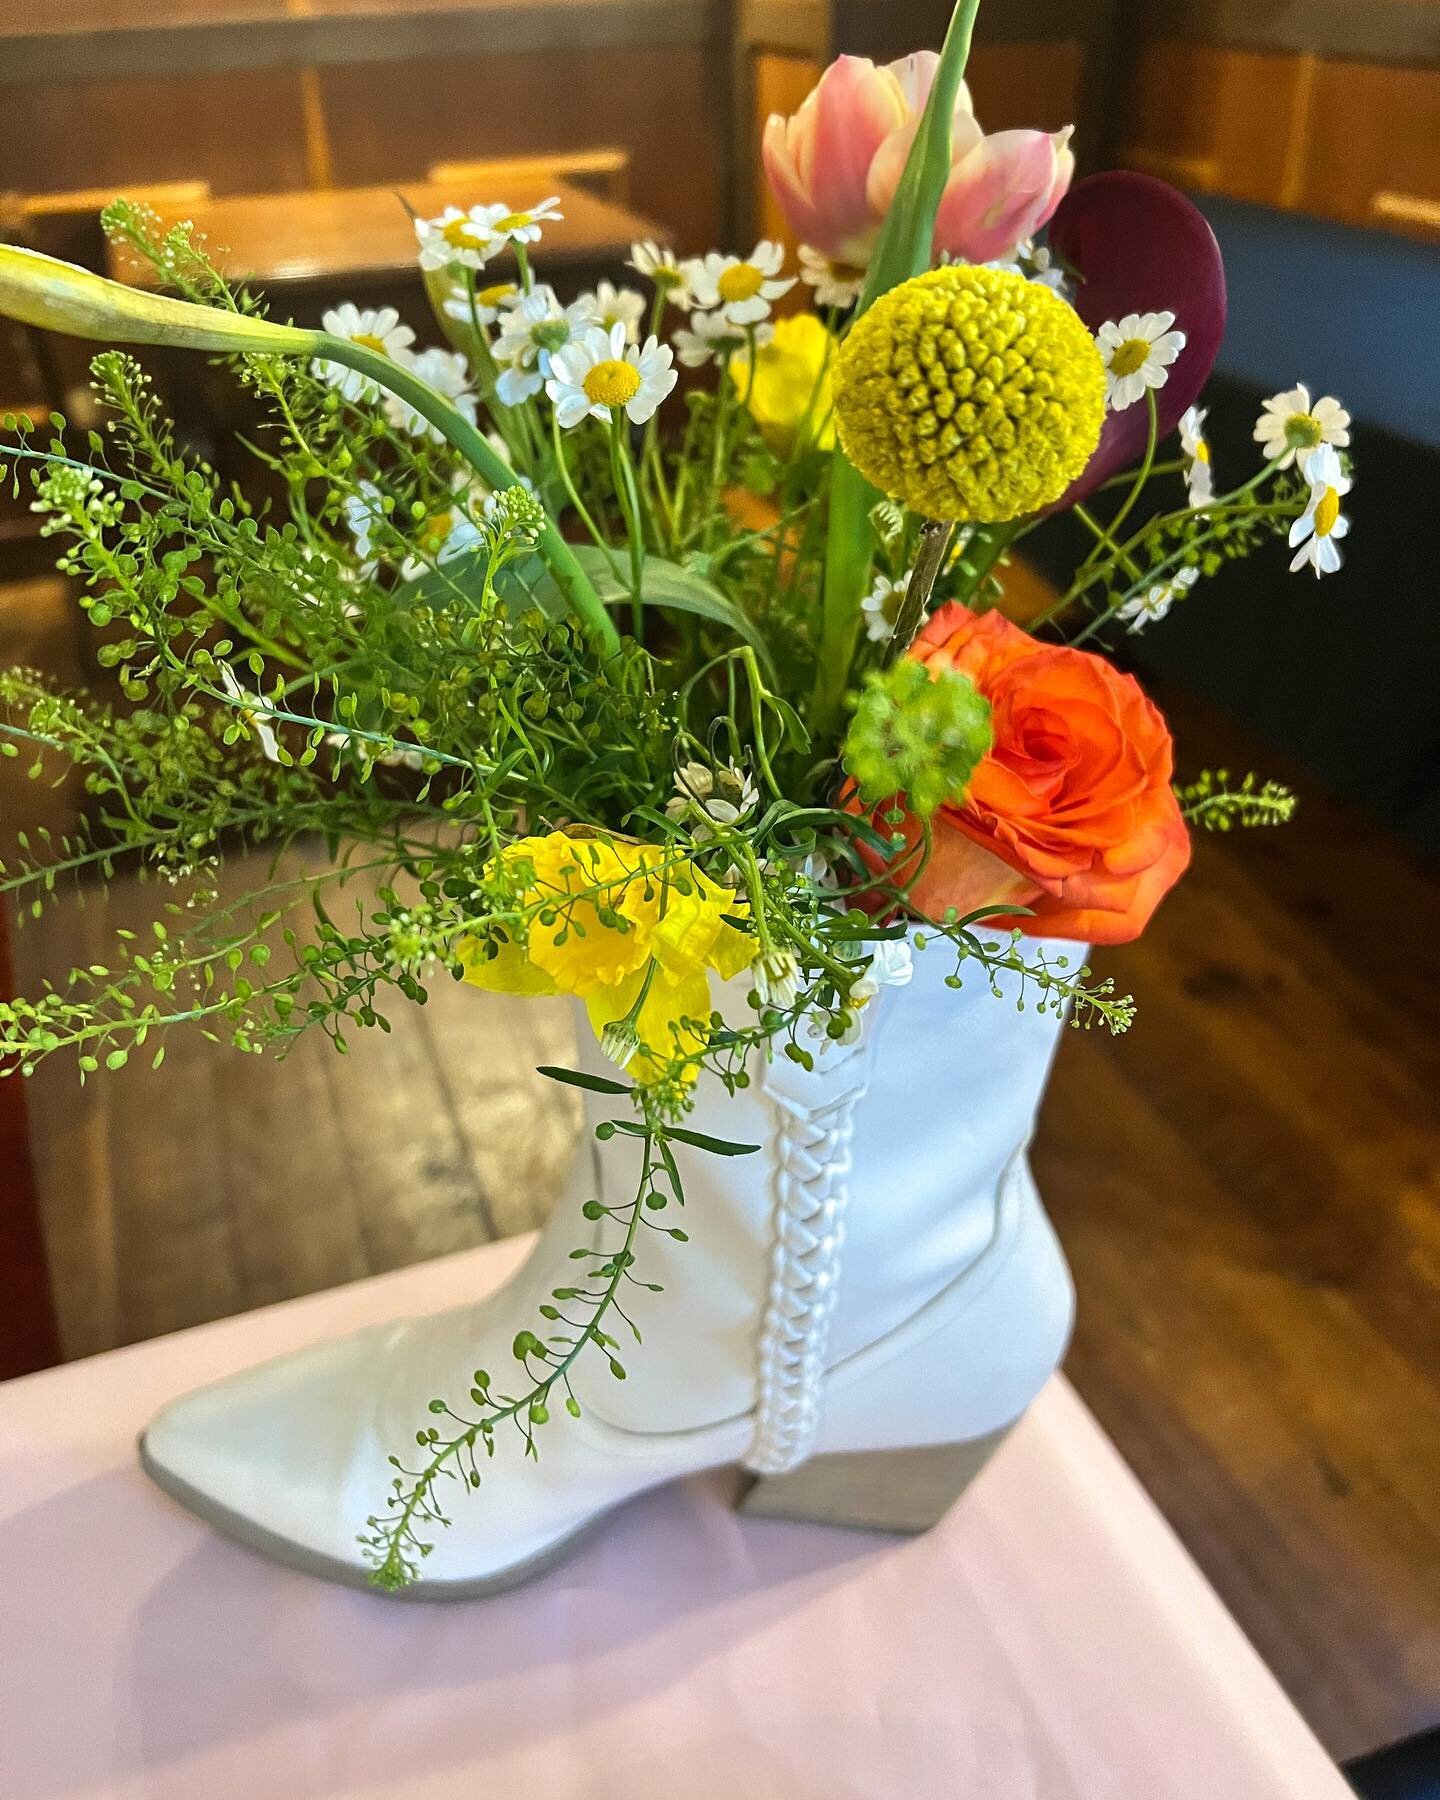 These boots are made for walking!&hellip;.and floral arrangements 🤍🌼
&bull;&bull;
Did you know that Katalina Co. also offers floral arrangements? Owner, Katelyn O&rsquo;Donel, received her bachelors degree from Texas A&amp;M University in Horticult